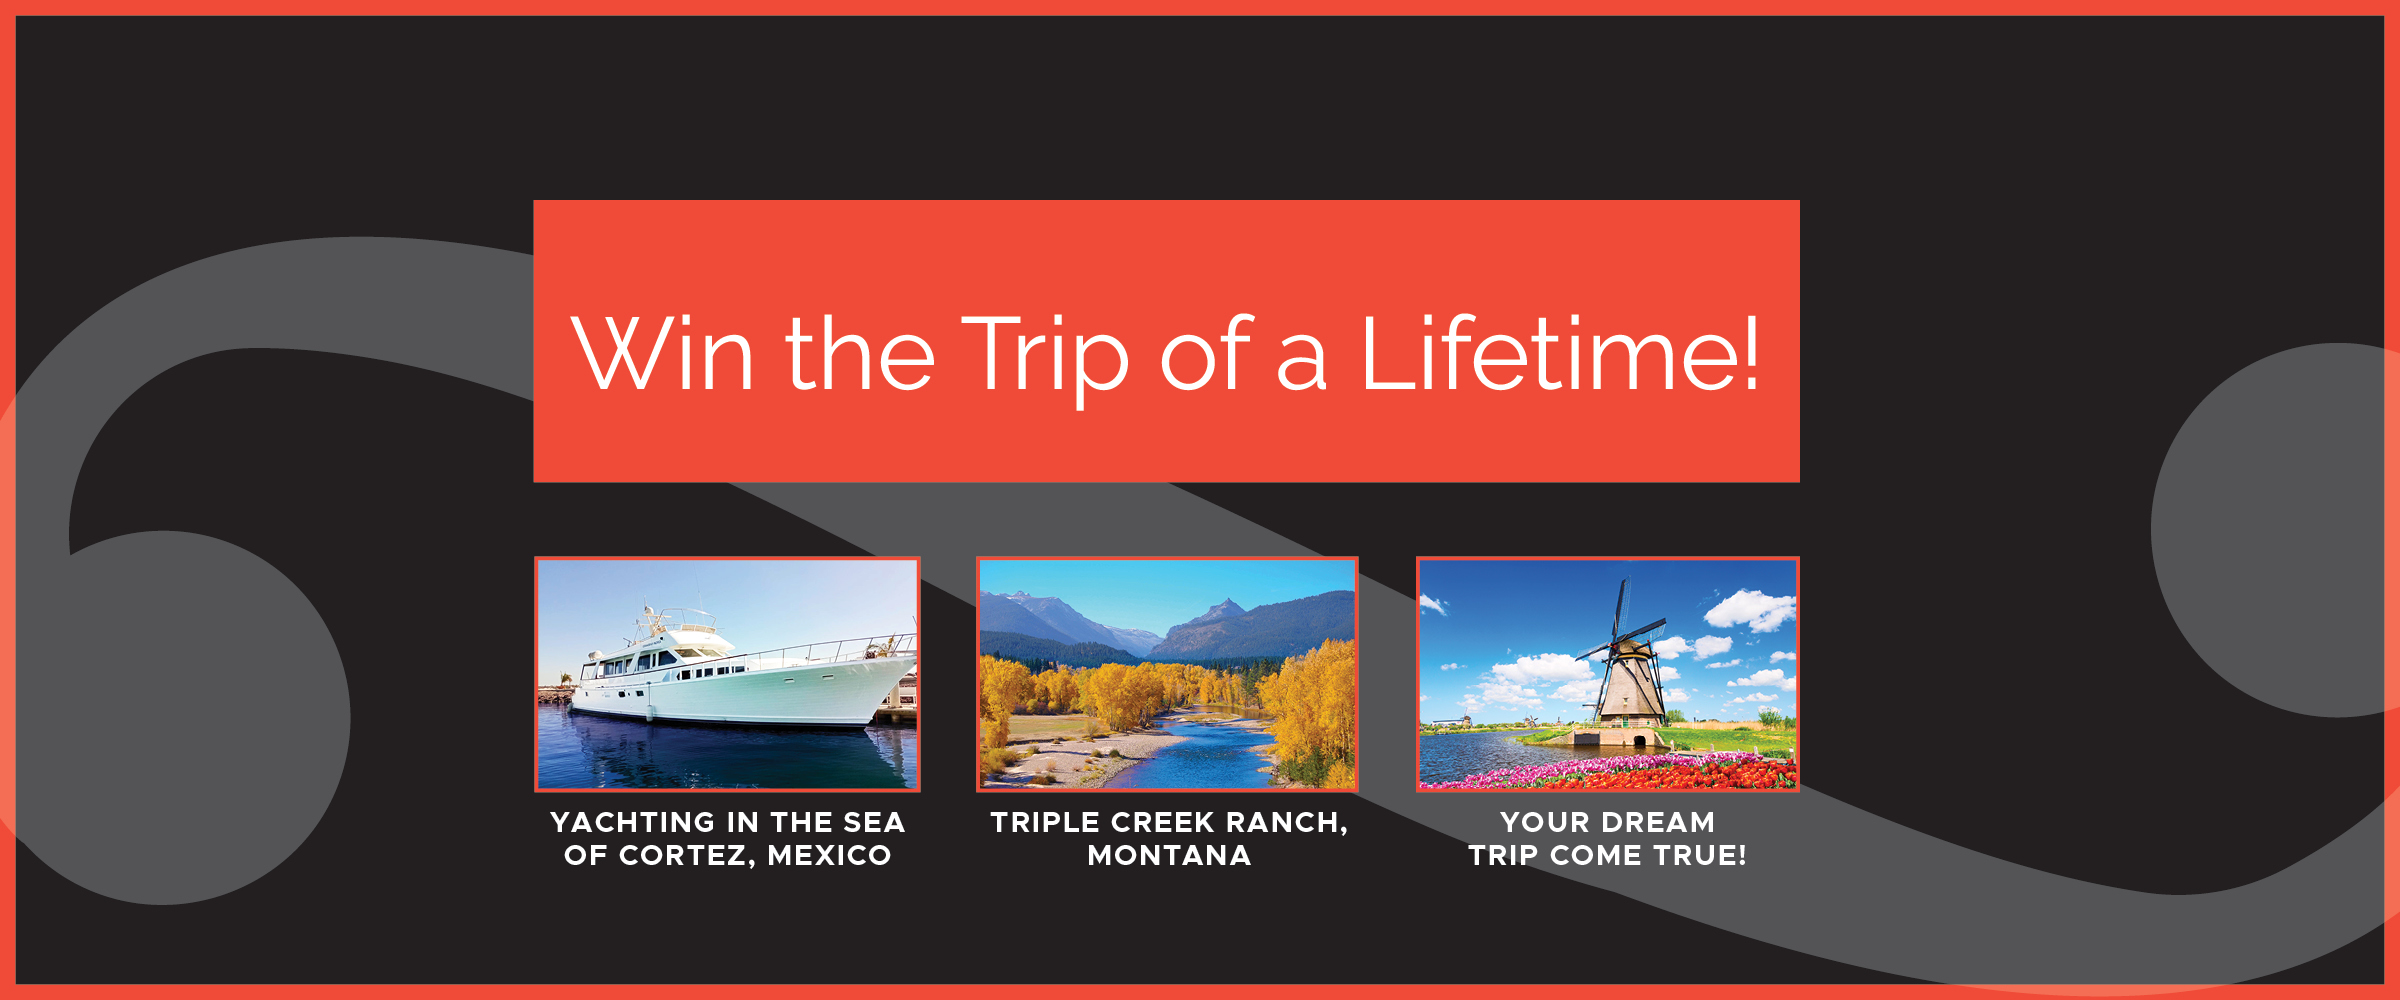 NOTICE: Win the Trip of a Lifetime!